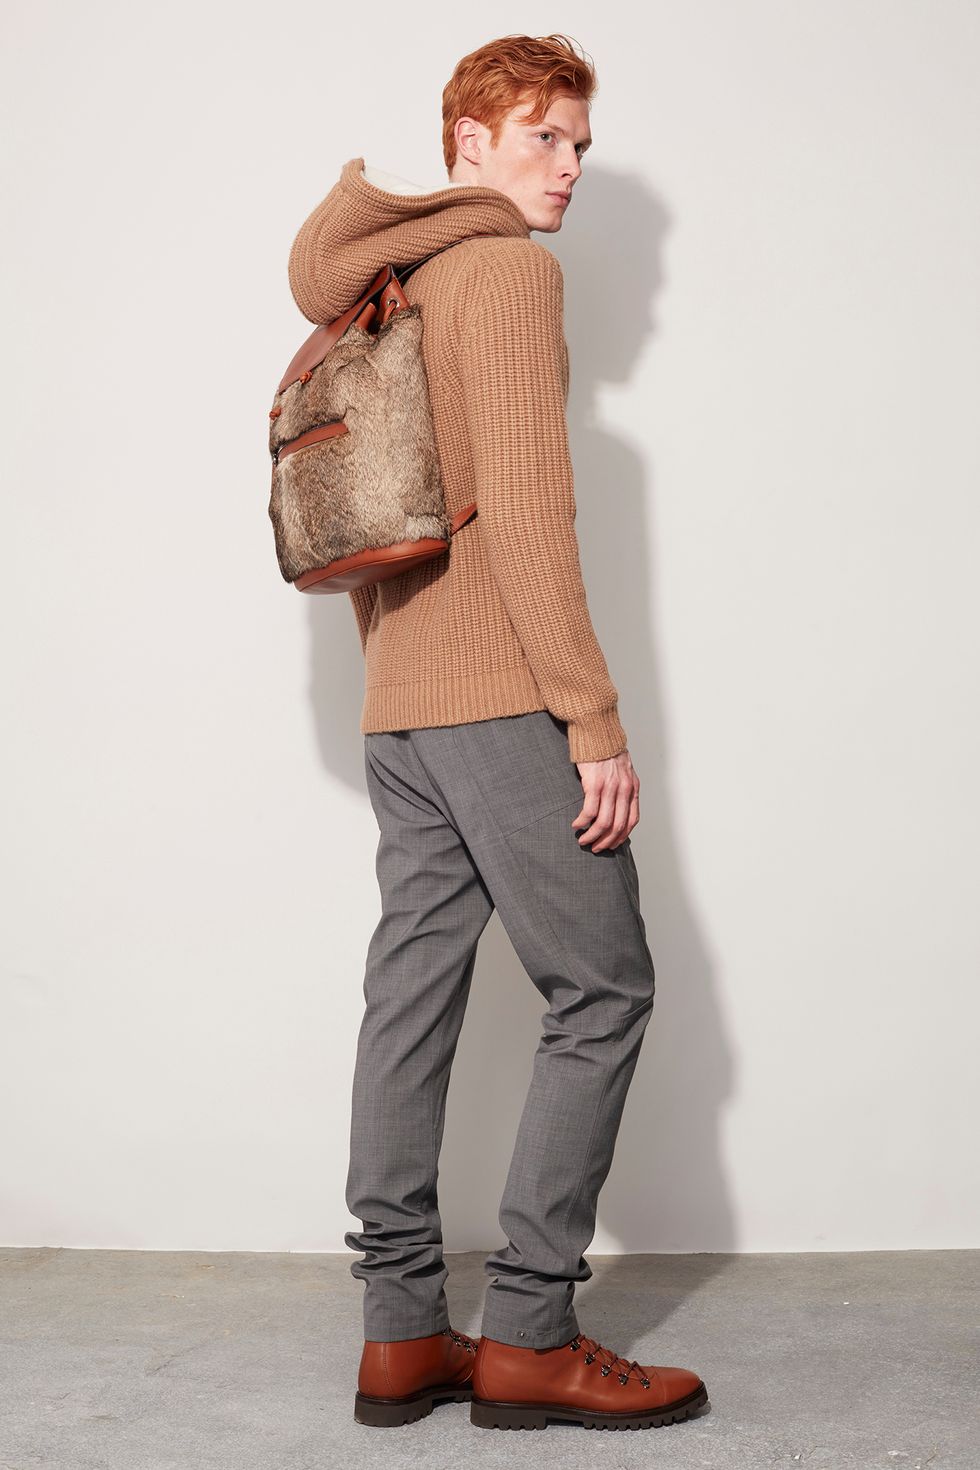 Brown, Sleeve, Shoe, Trousers, Human body, Shoulder, Textile, Standing, Joint, Outerwear, 